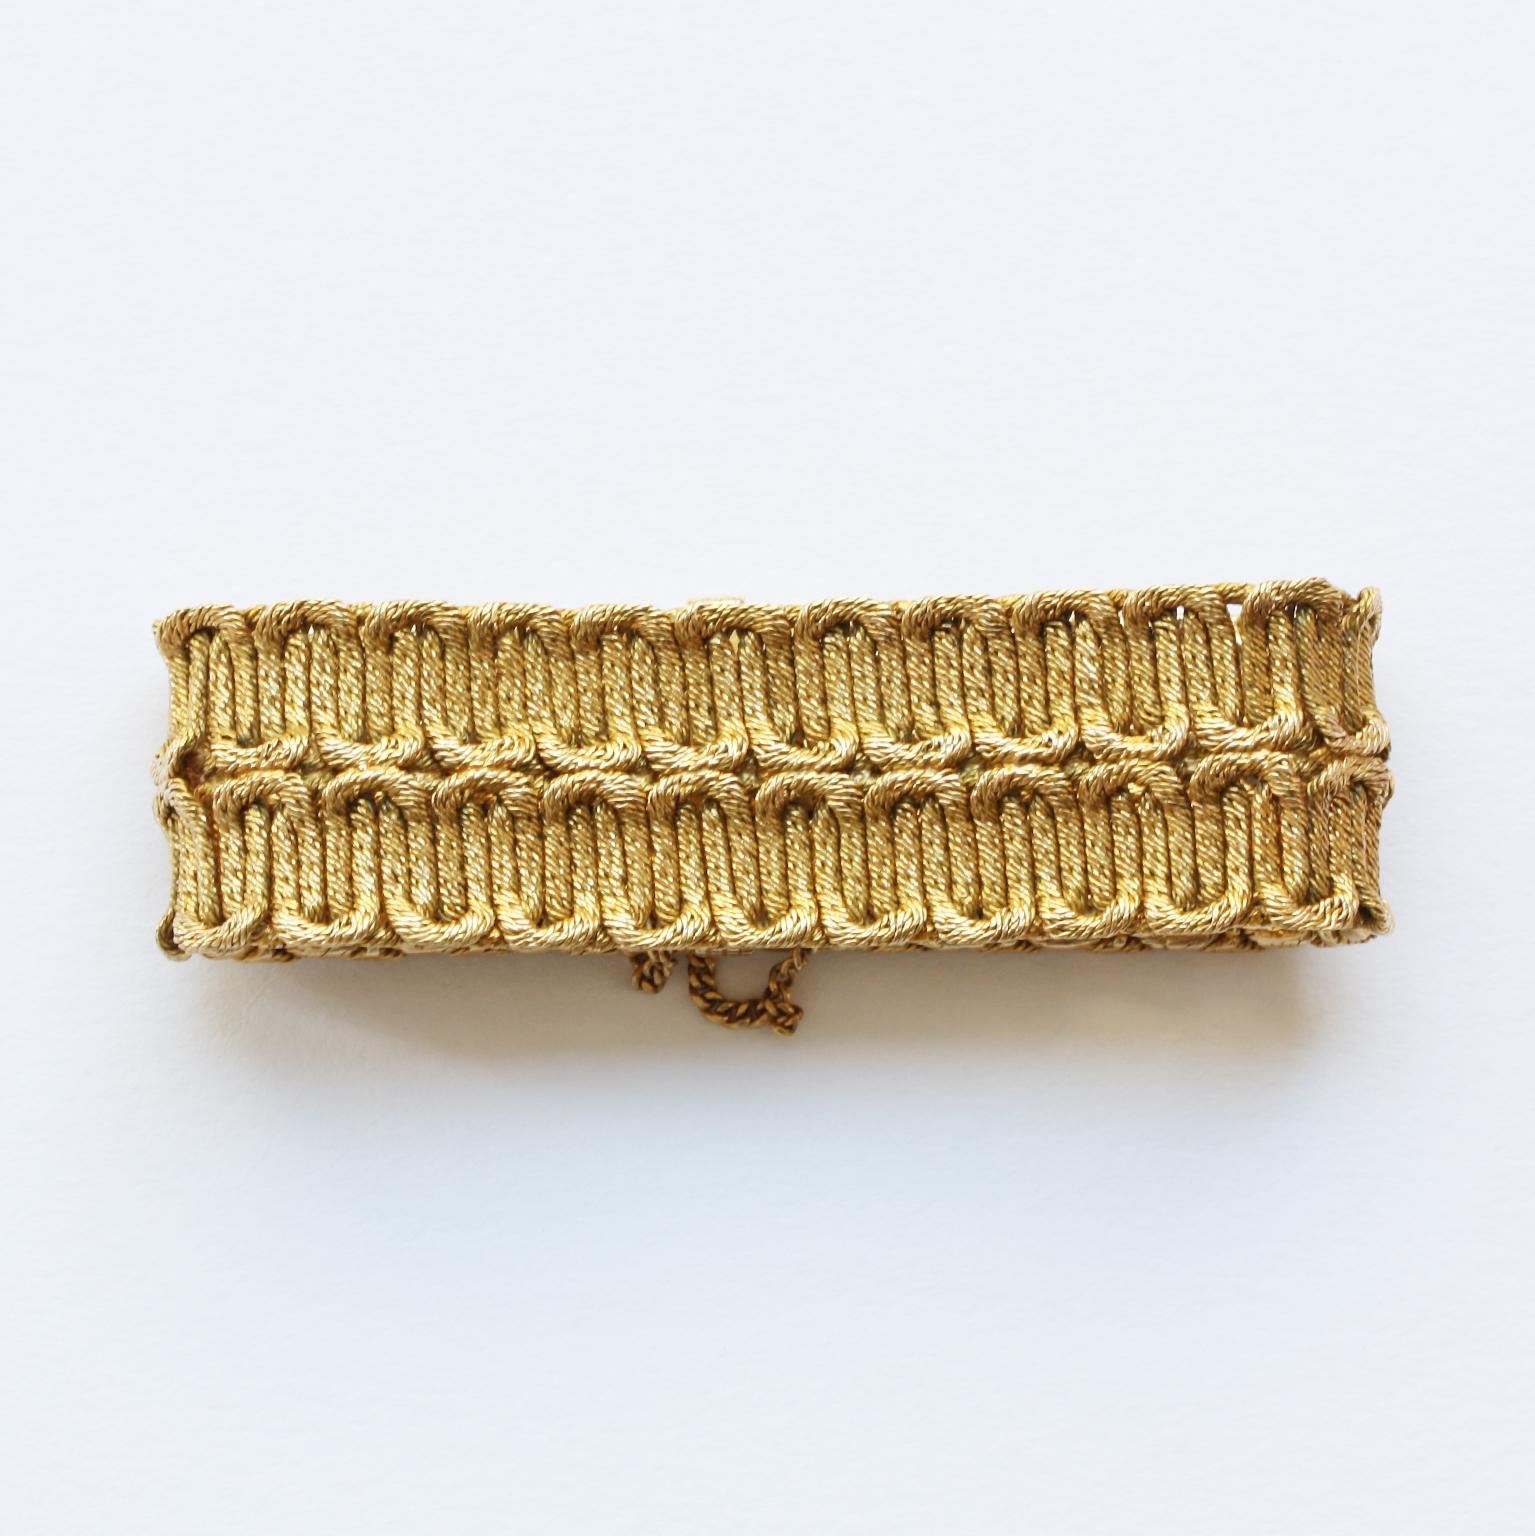 An 18 carat gold bracelet by Georges Lenfant. Lenfant made some of the finest chain work you have ever seen. Double rows of conjoined U shaped links in Lenfant’s typical braided gold, France, circa 1970. Alas the master mark is no longer legible so